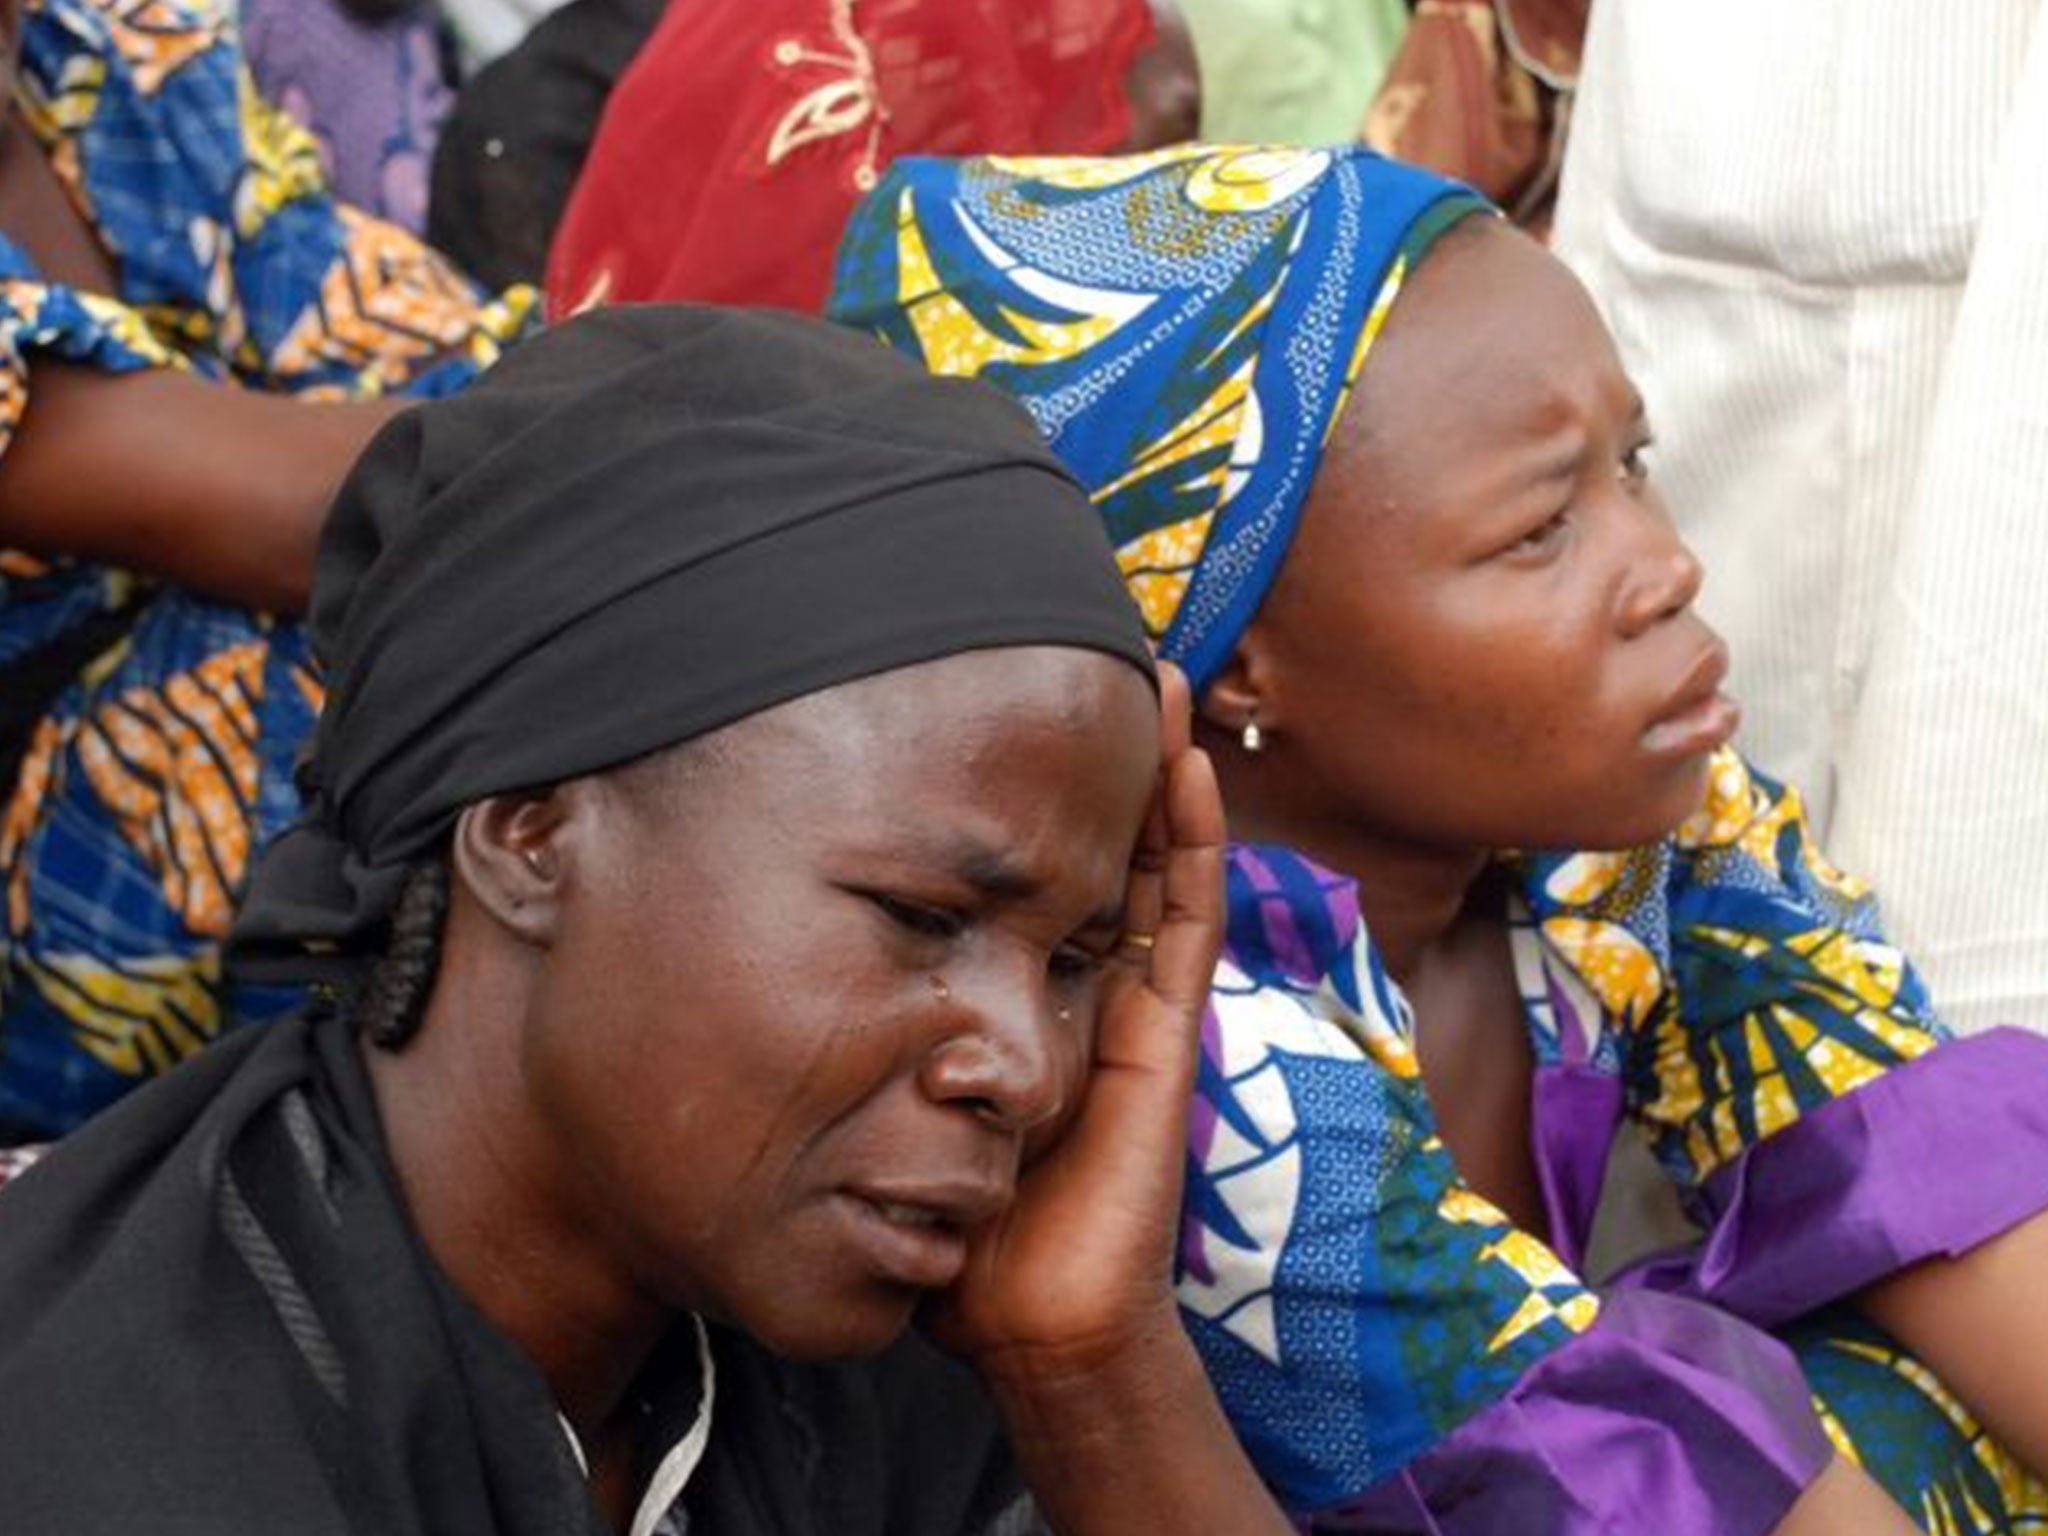 Mothers of the missing Chibok school girls abducted by Boko Haram Islamists gather to receive information from officials